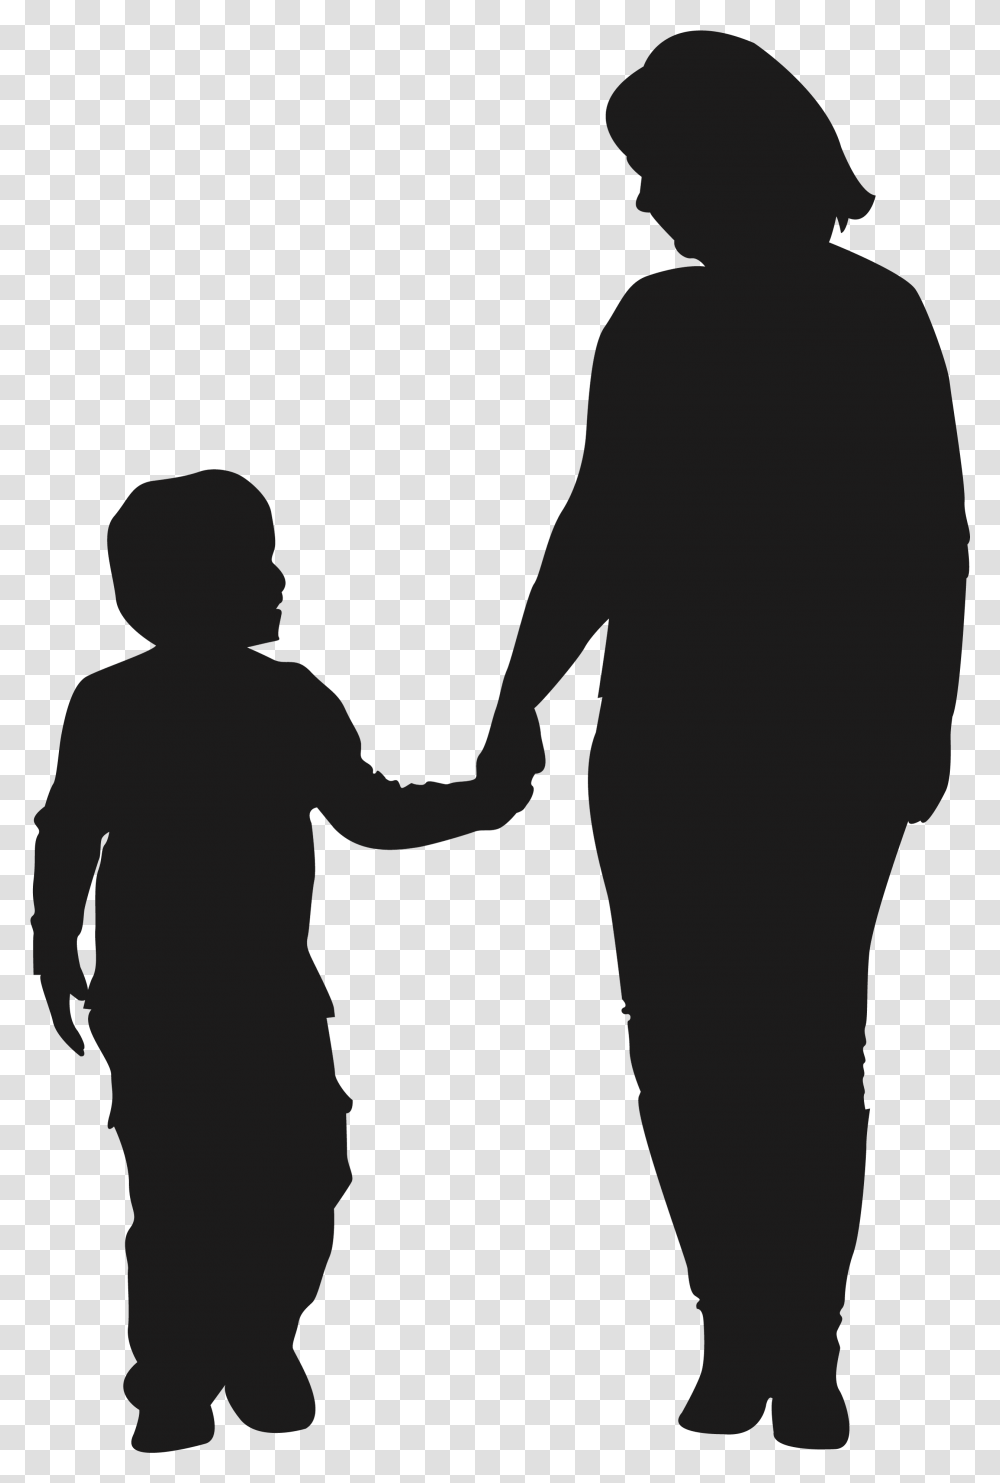 Mother Child Silhouette Son Mother And Son Emoji, Hand, Person, Human, Holding Hands Transparent Png